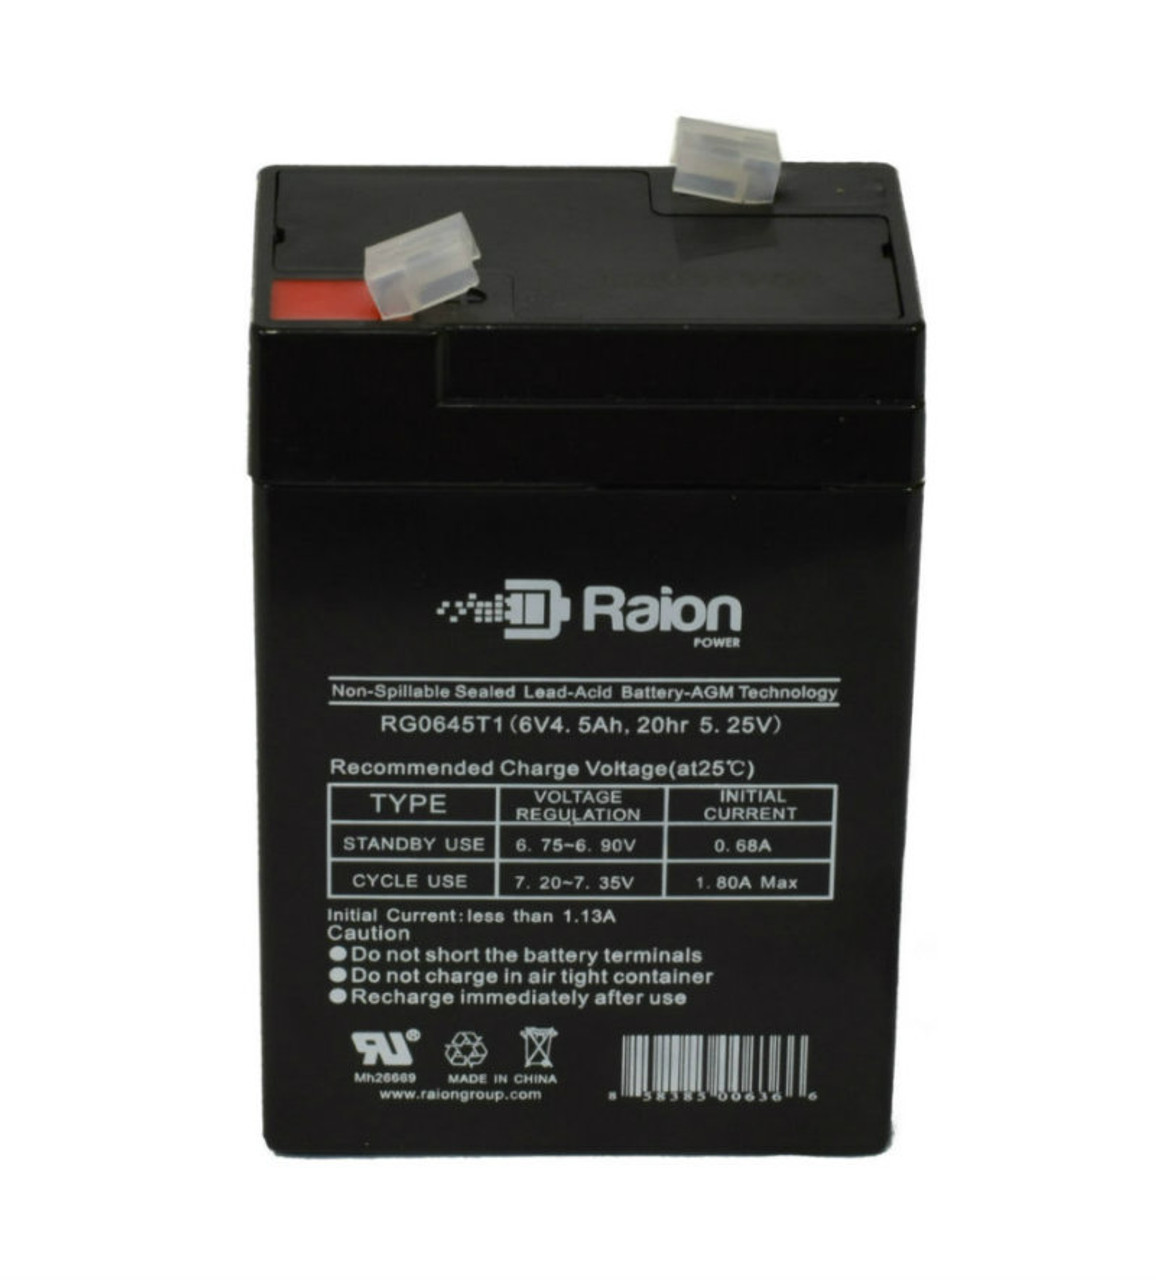 Raion Power RG0645T1 Replacement Battery Cartridge for Criticare Systems 504Us Pulse Oximeters